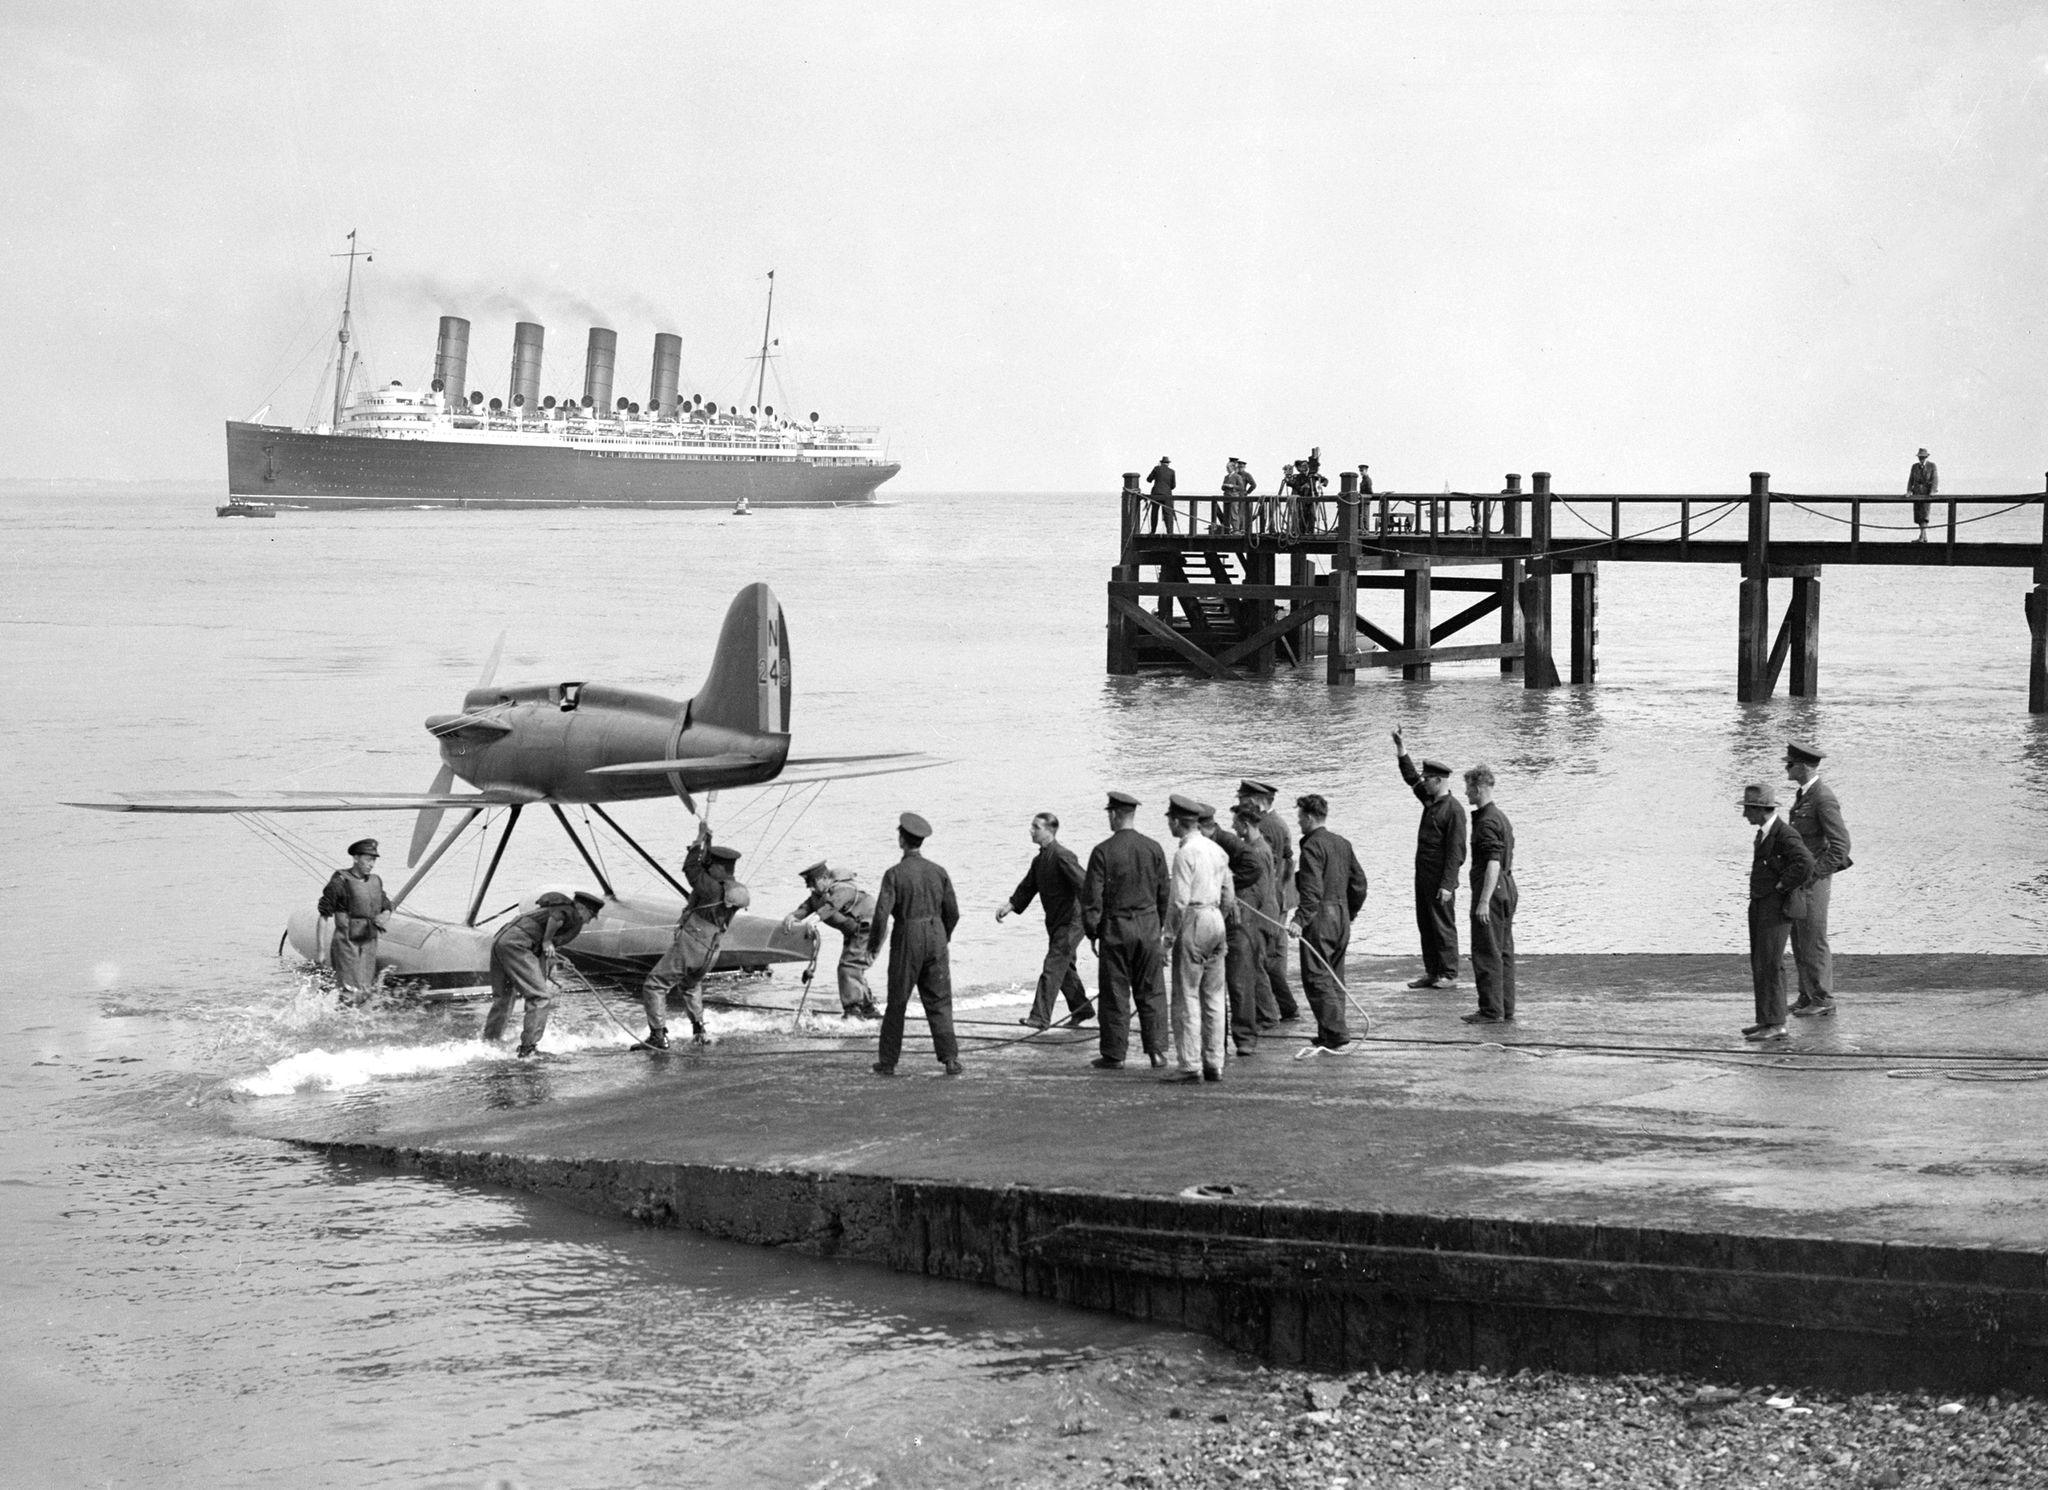 the gloster napier powered supermarine s6 being launched at cowes for the 1929 schneider trophy, with the mauretania in